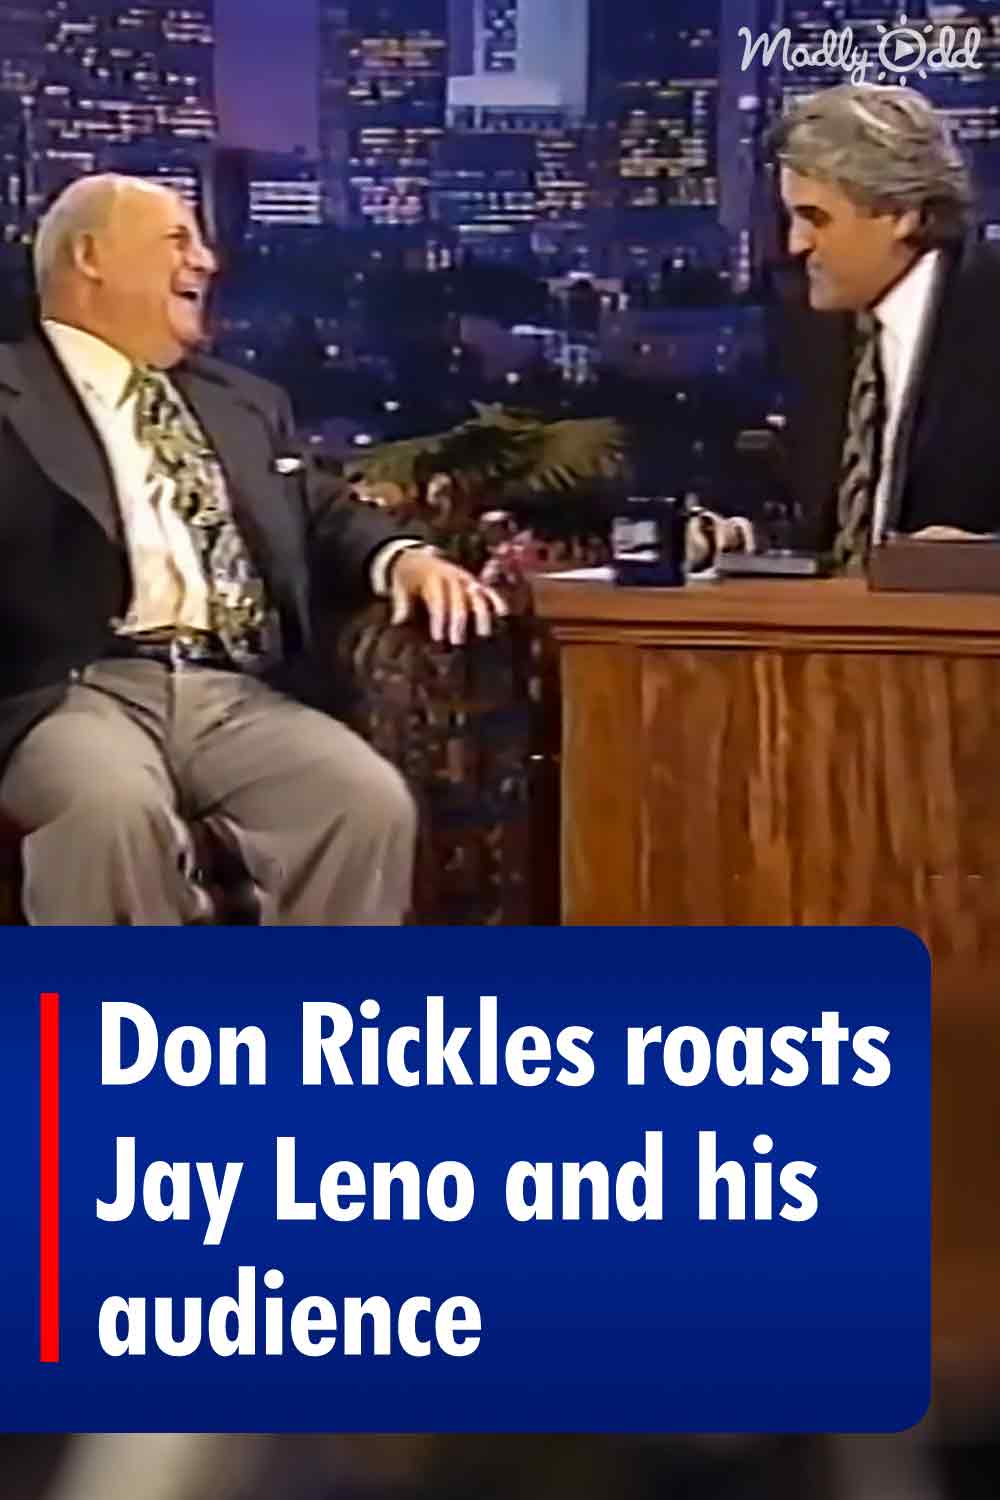 Don Rickles roasts Jay Leno and his audience